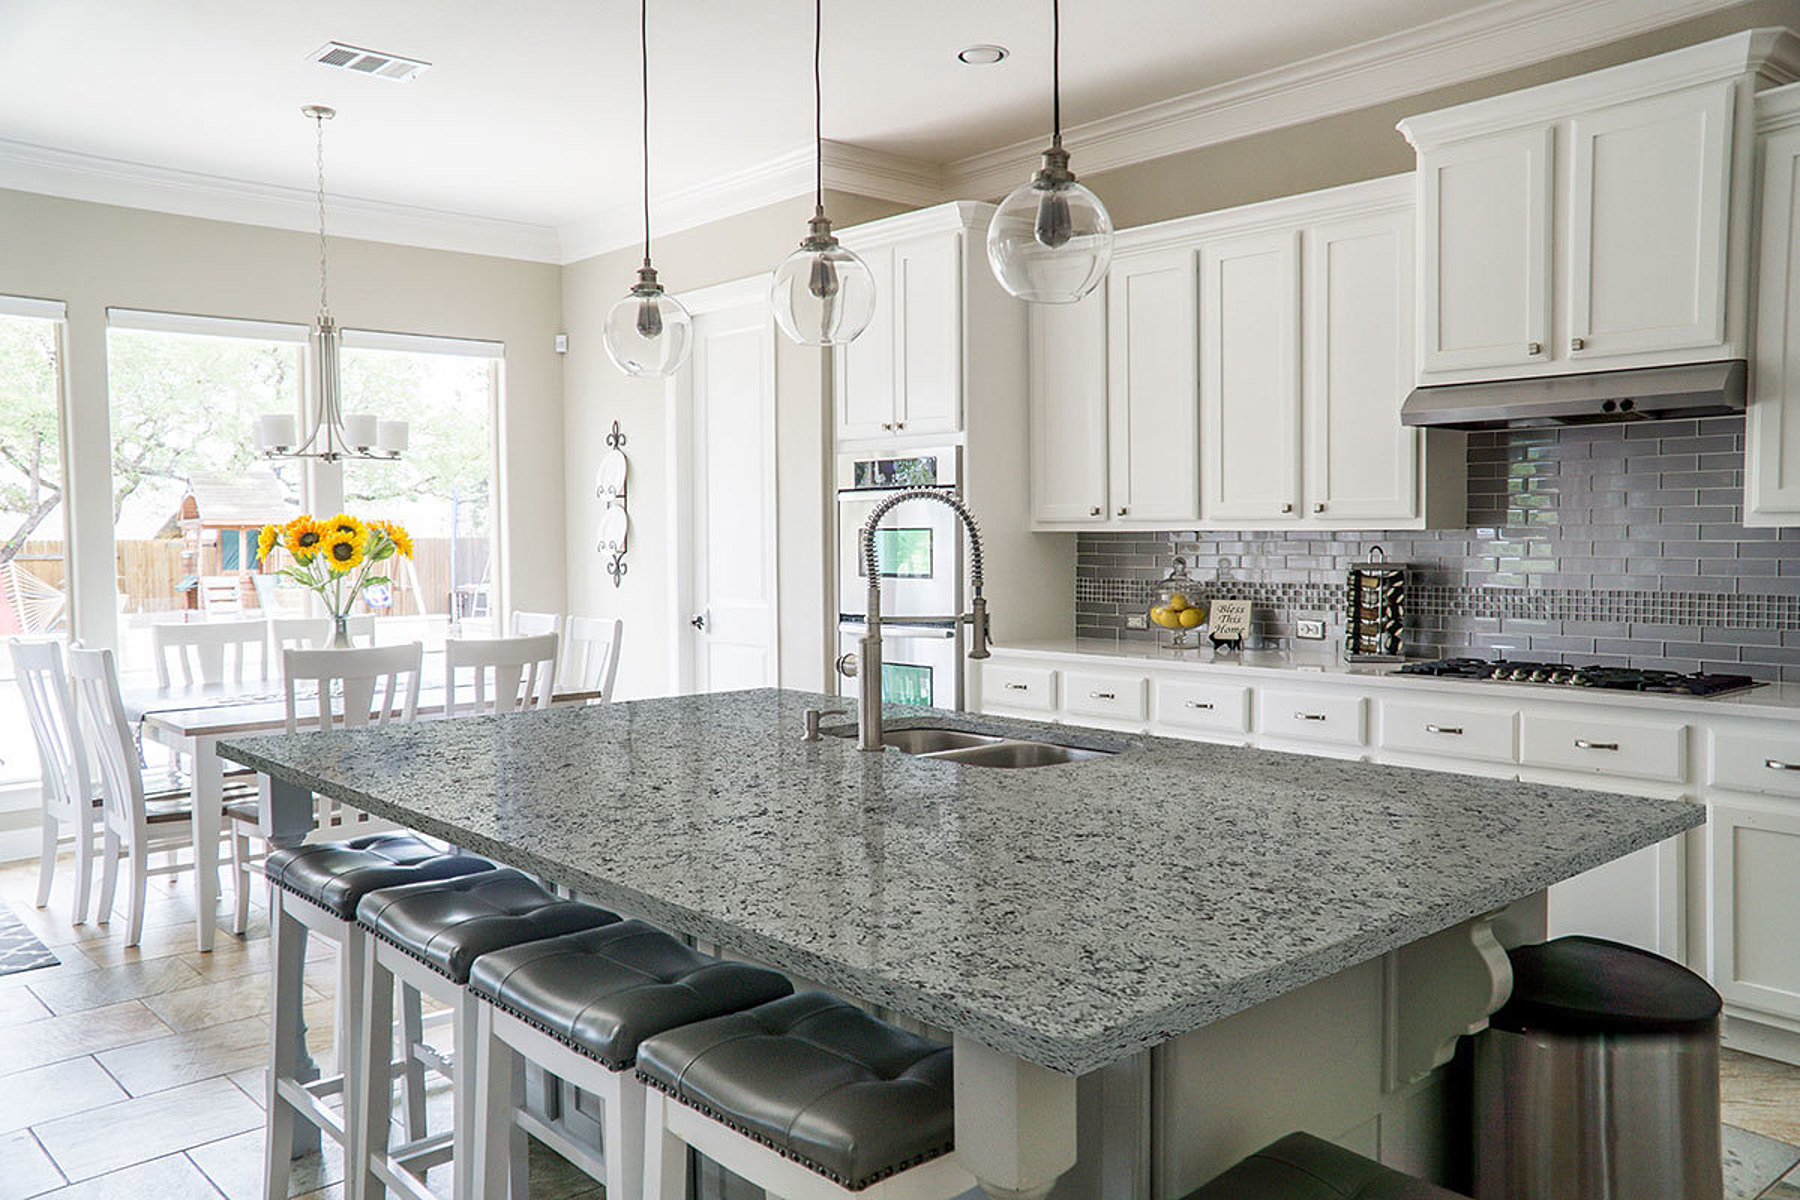 How to Choose the Right Edge Profiles for Your Granite Countertops?